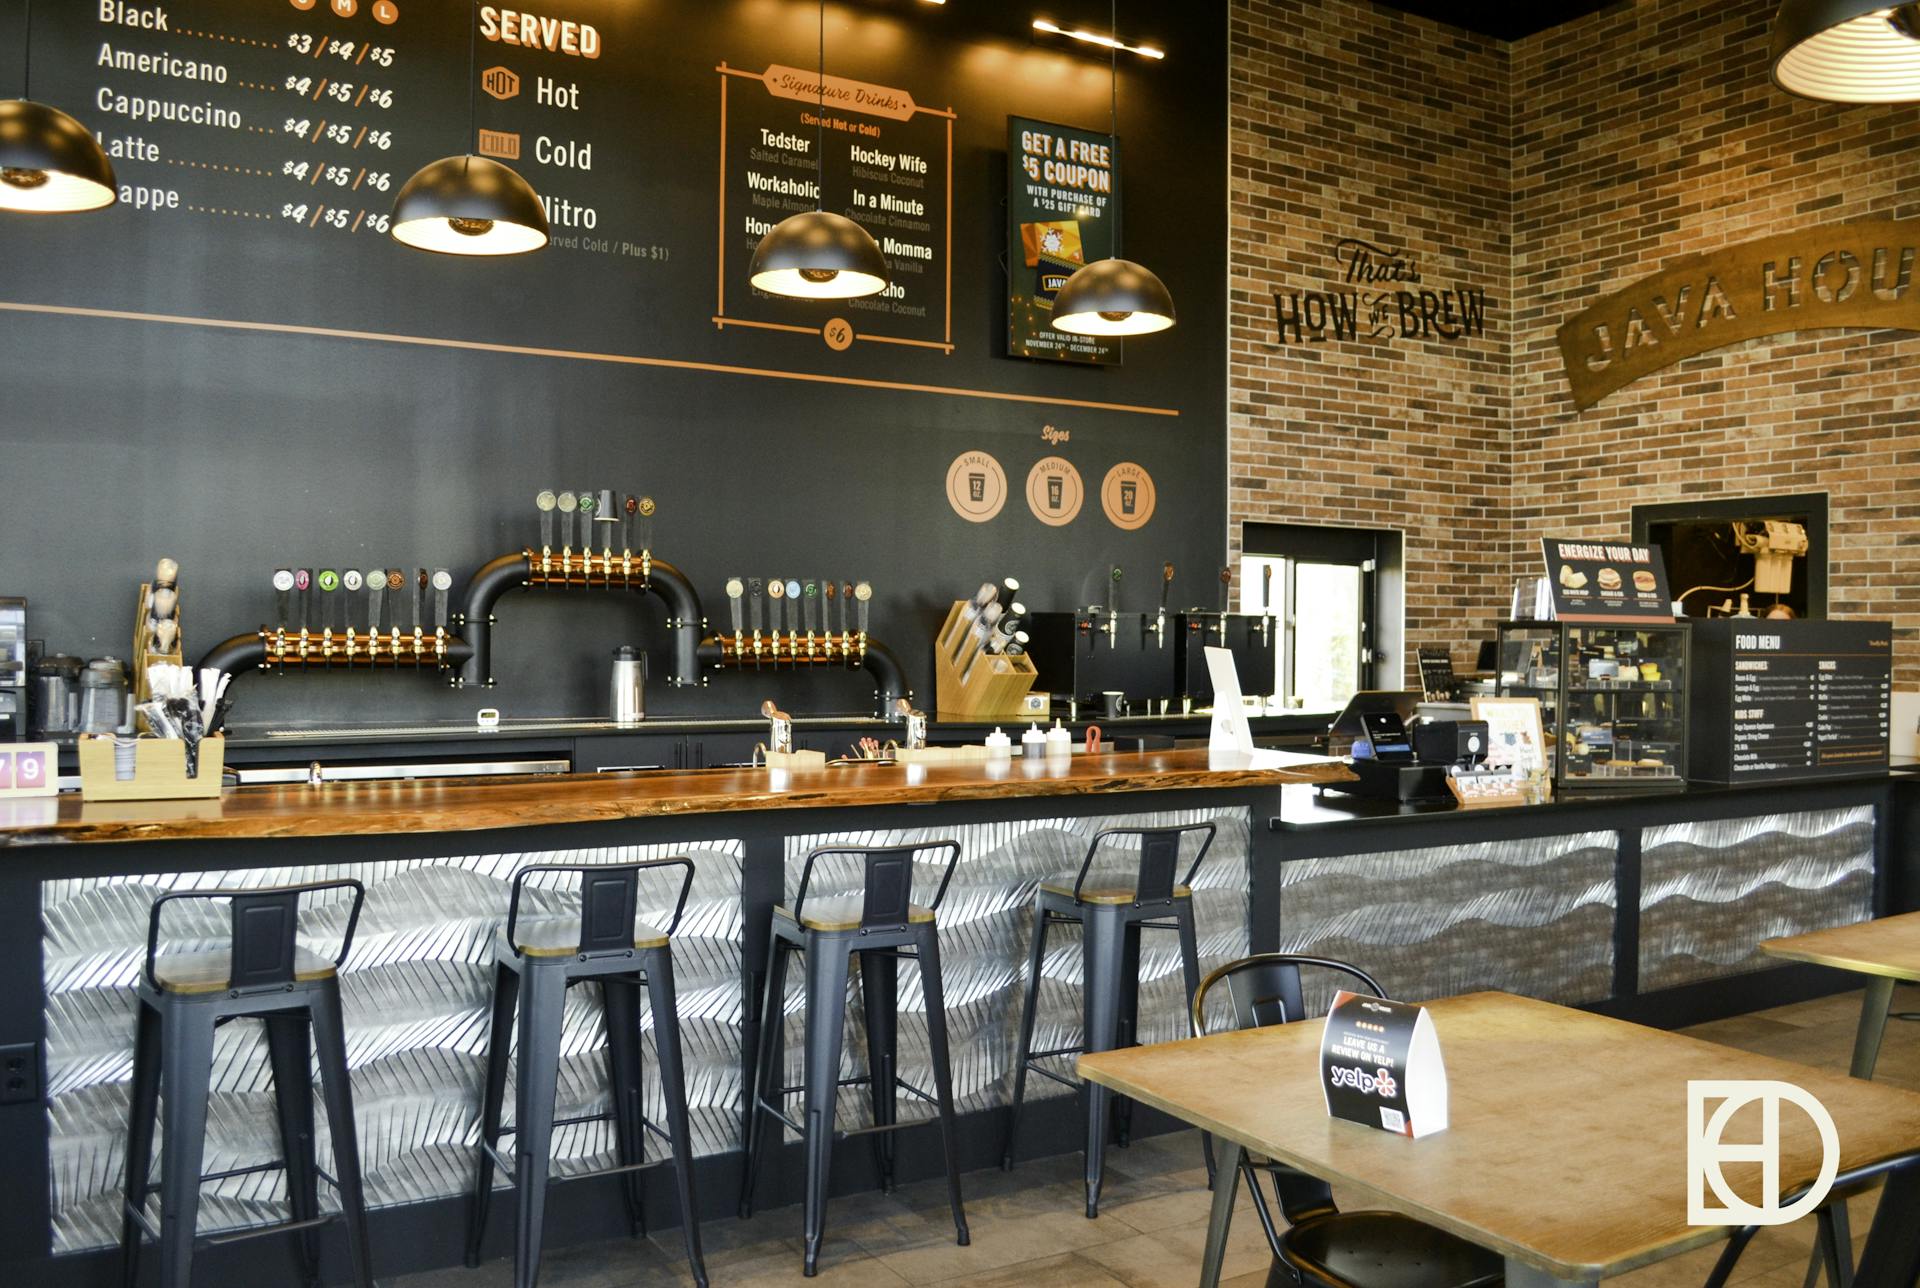 Photo of the interior of Java House, showing the coffee bar